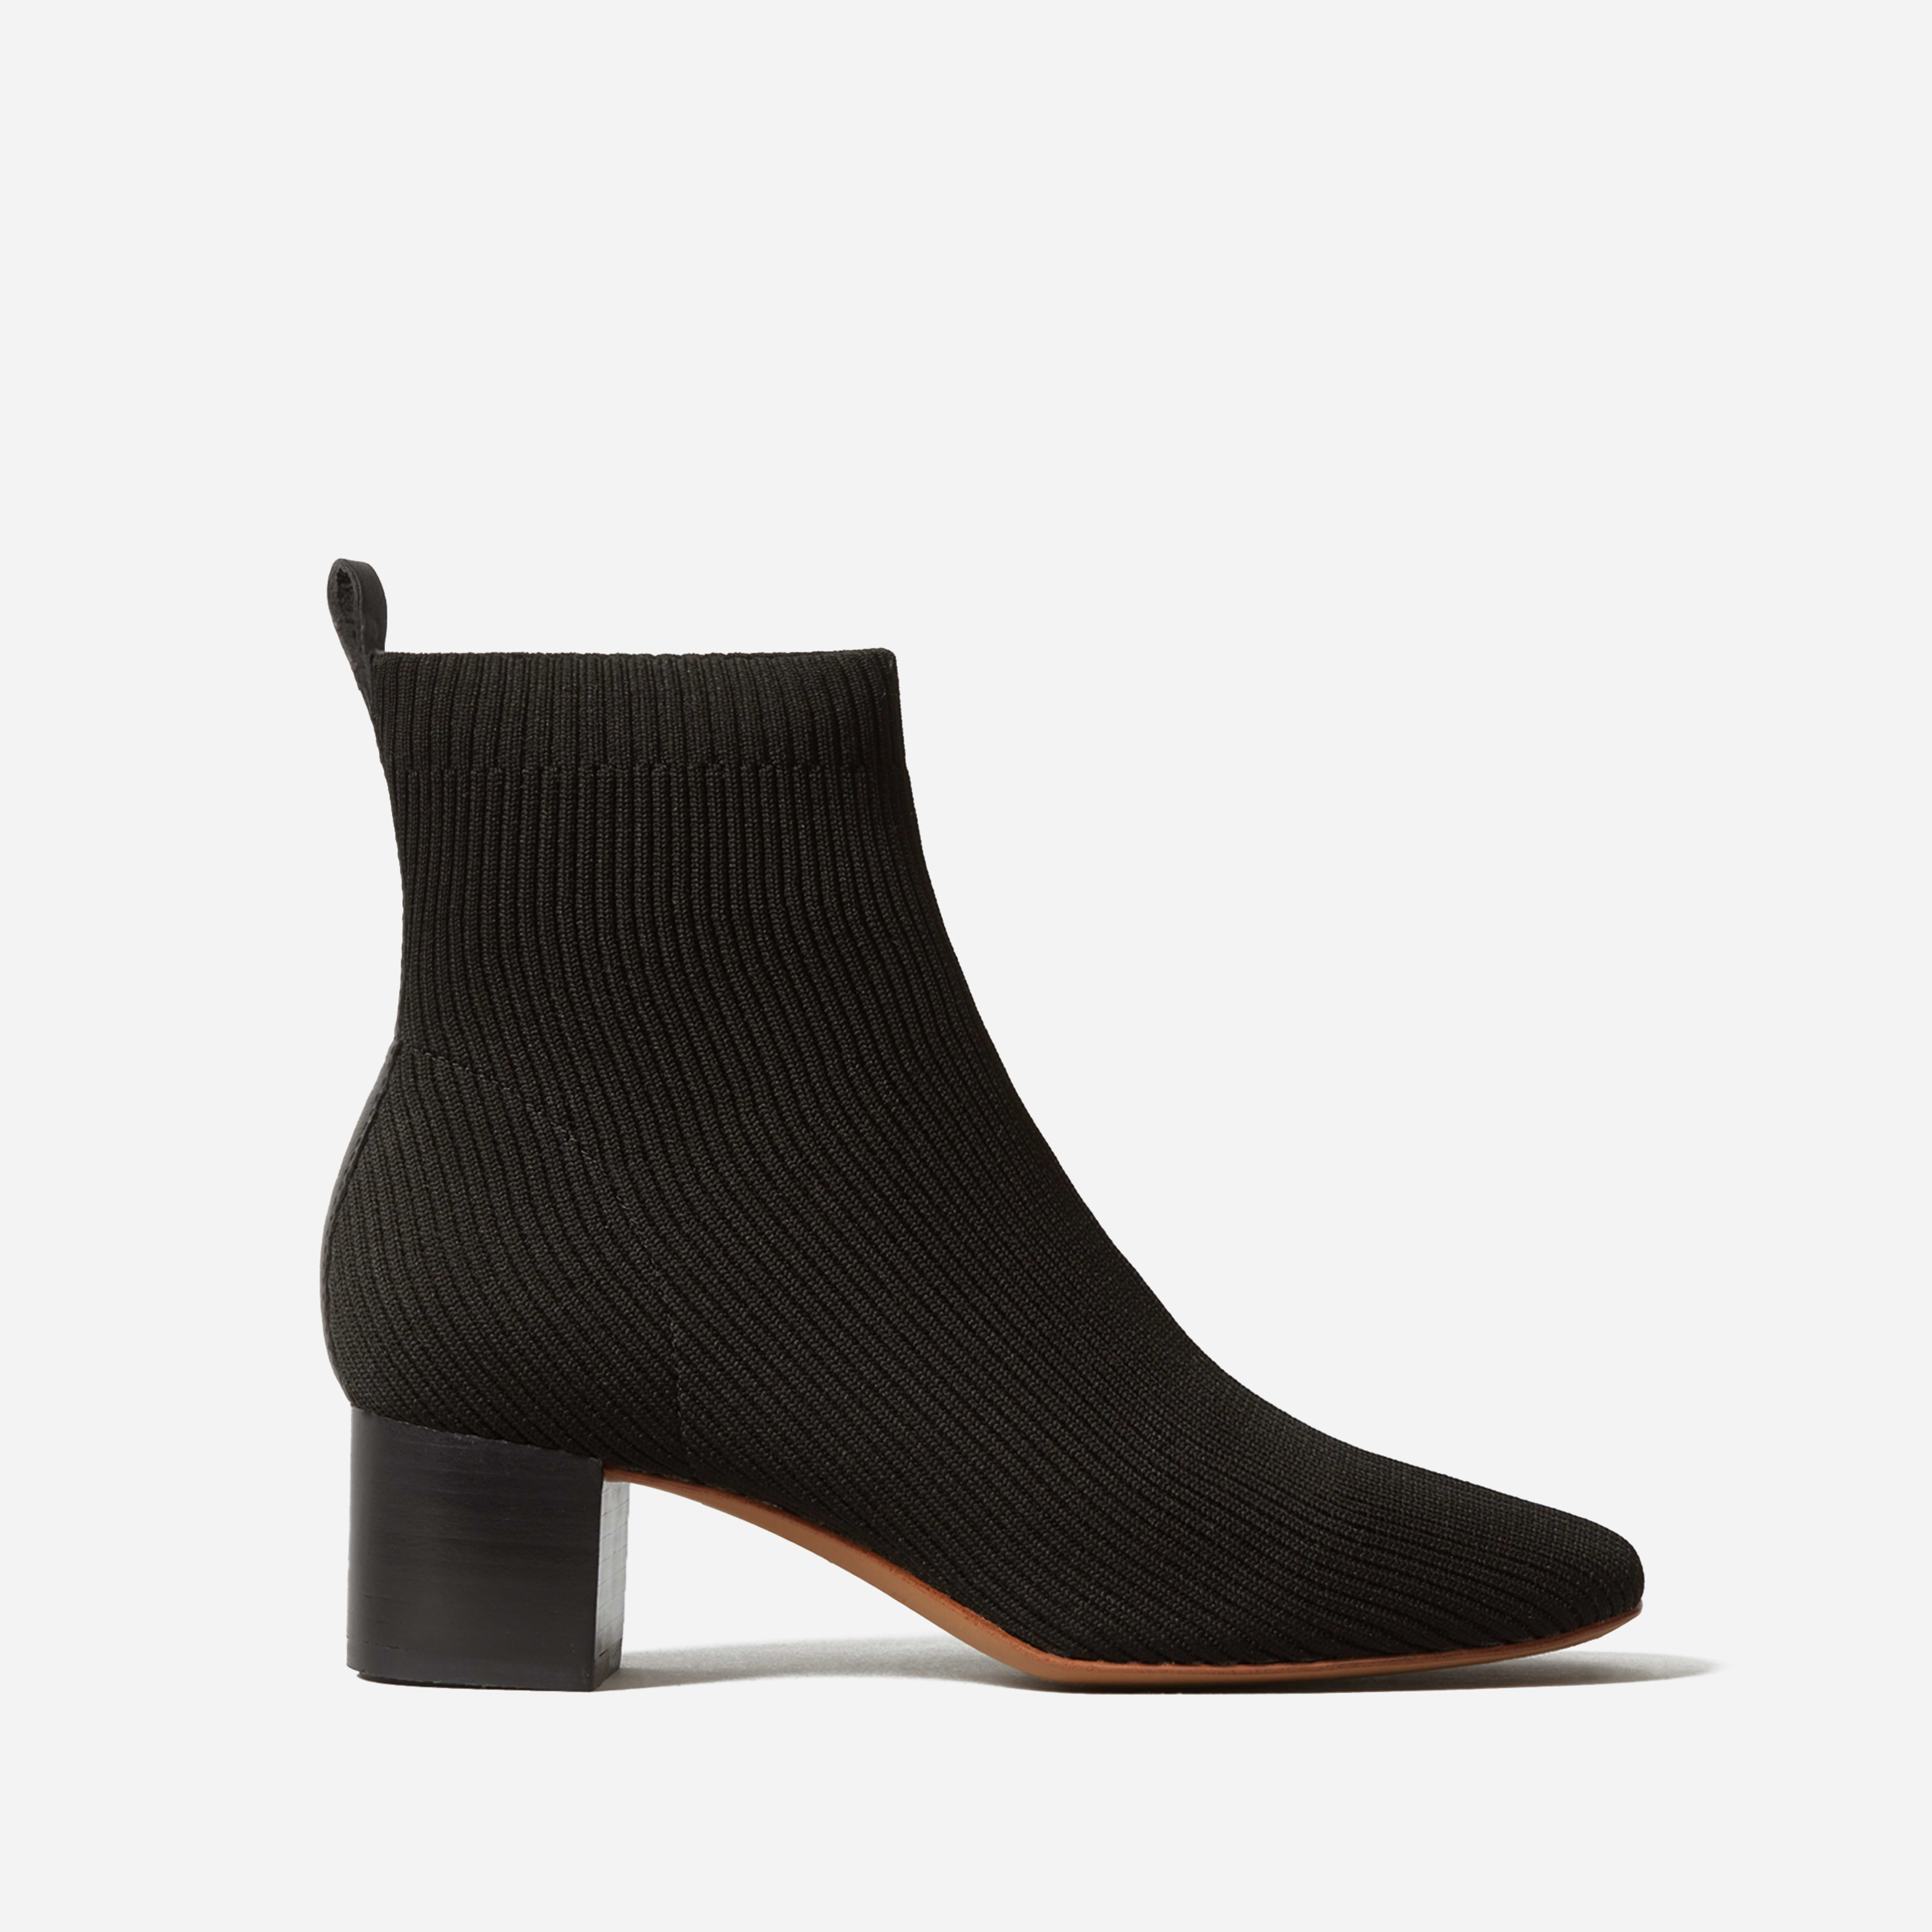 Women's Glove Boot by Everlane in Black, Size 6.5